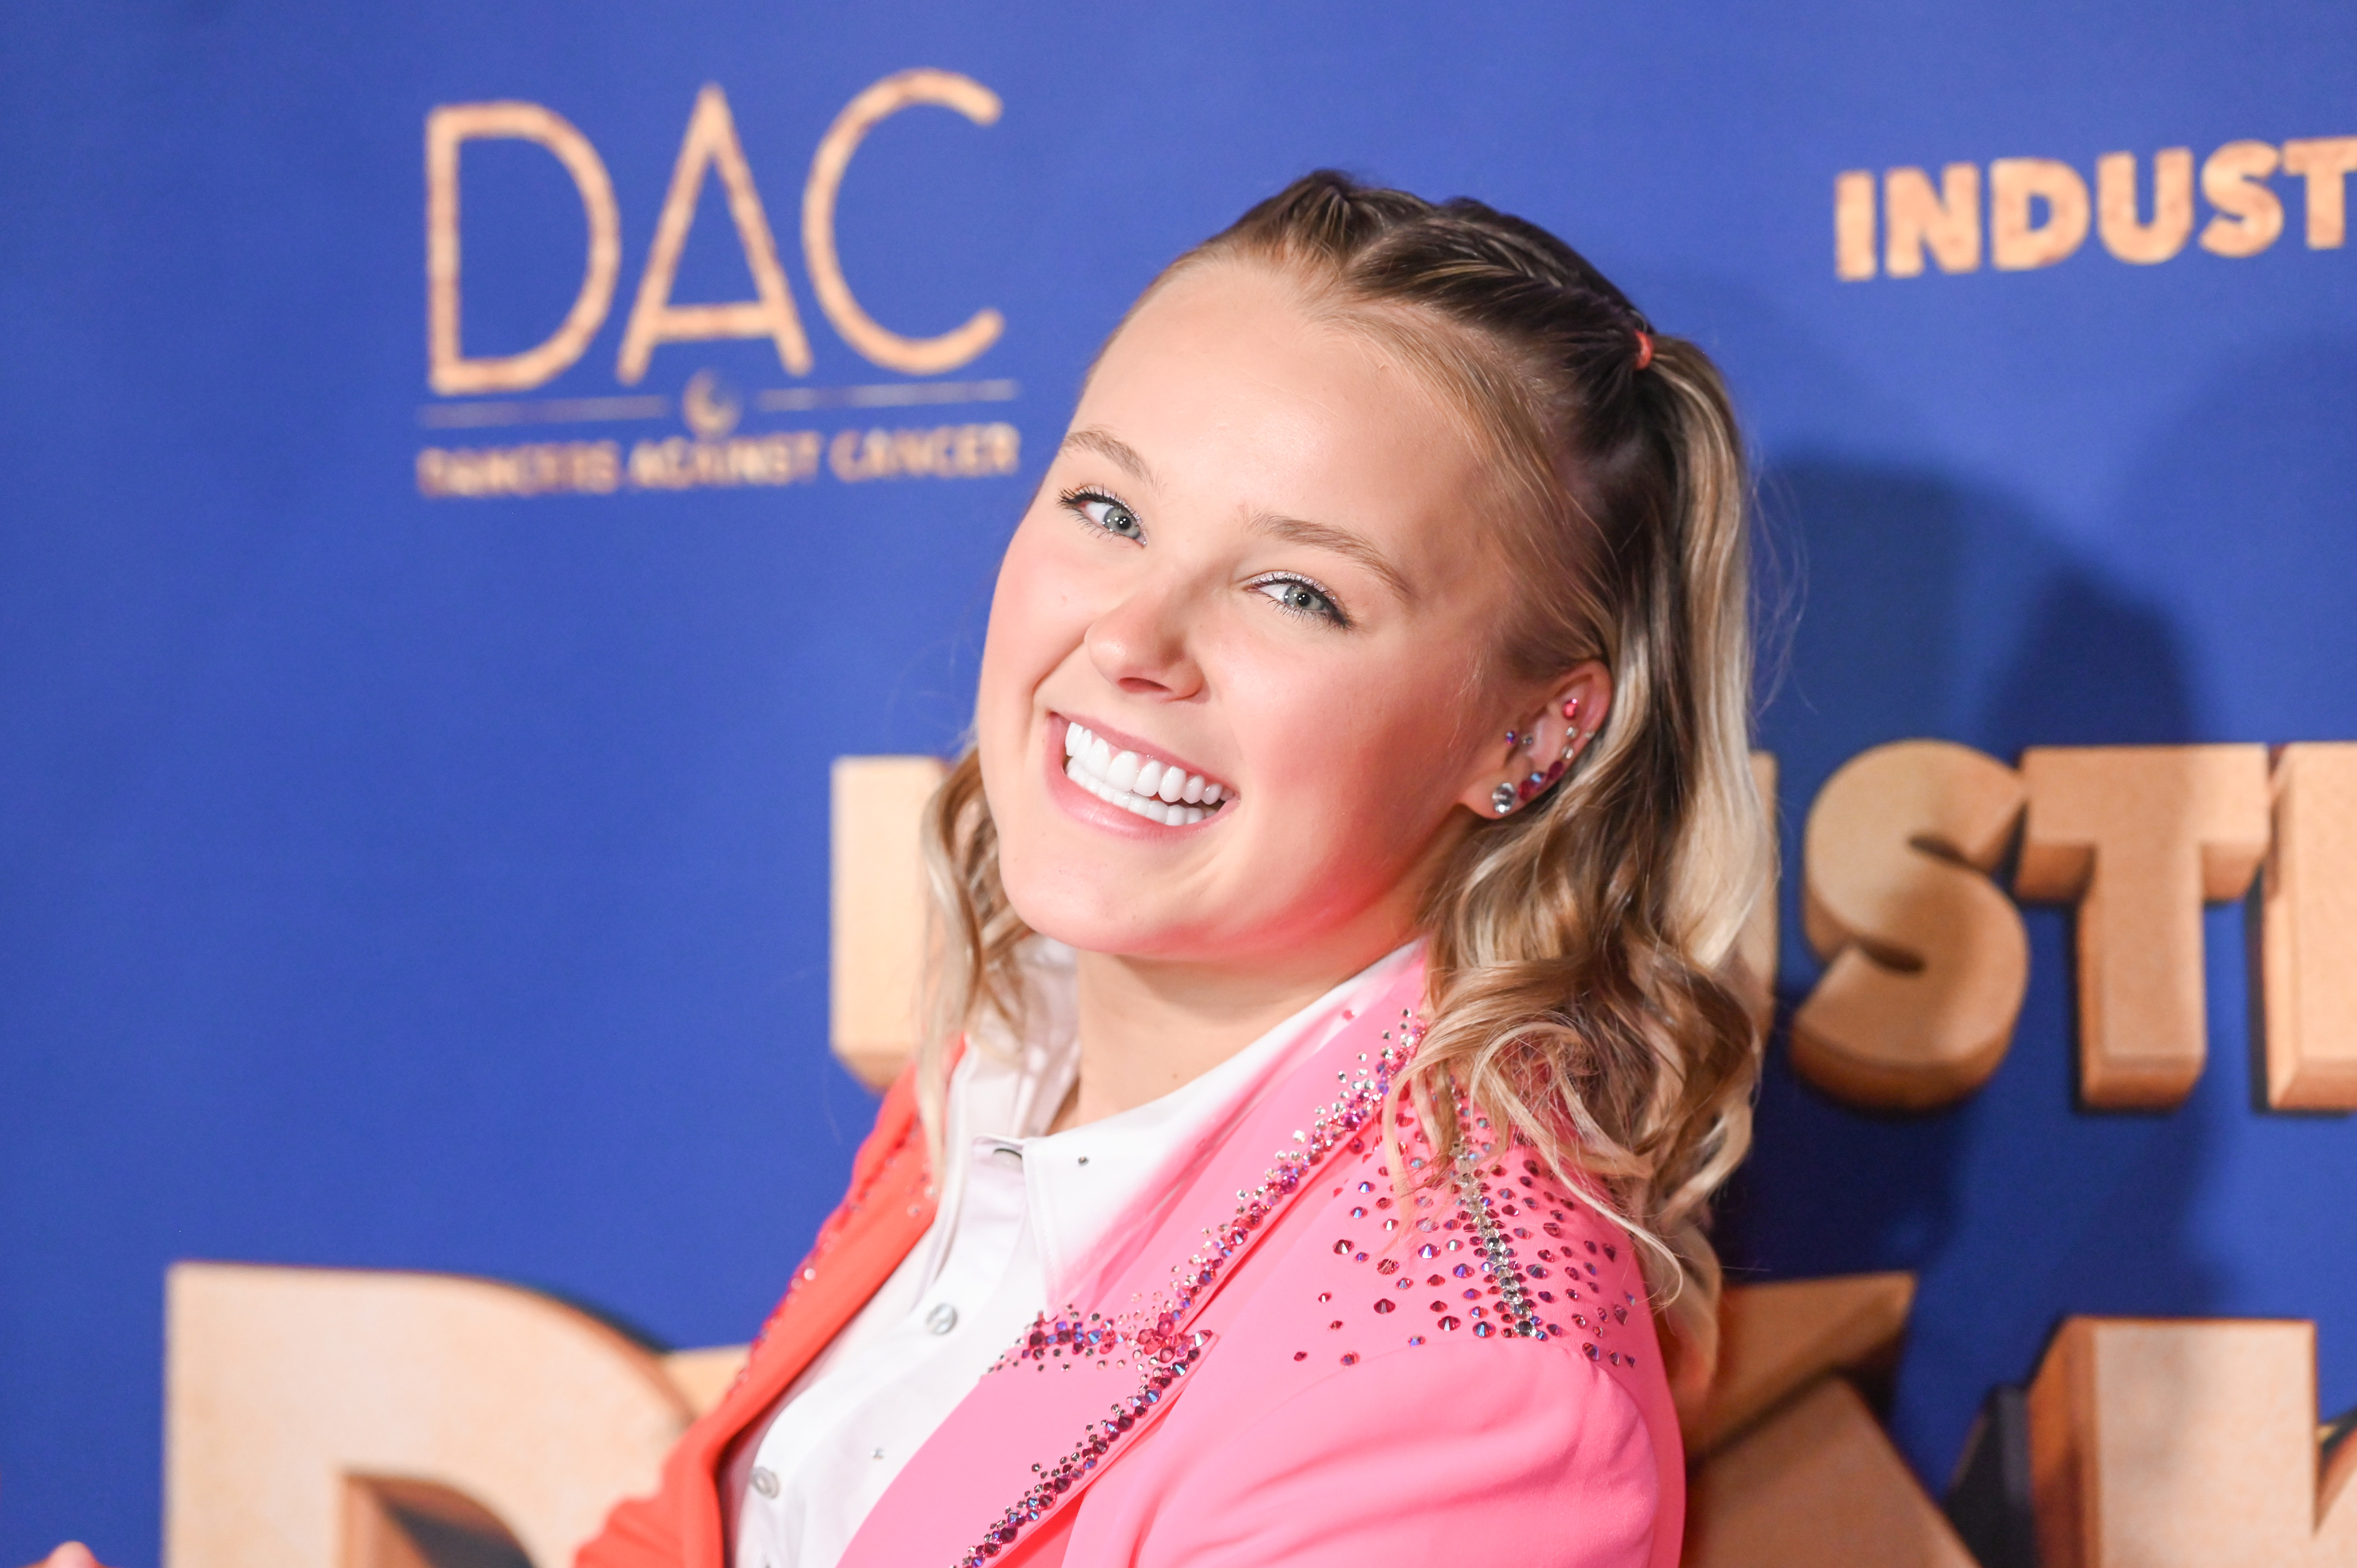 JoJo Siwa smiling at a premiere event, wearing a pink blazer over a white shirt